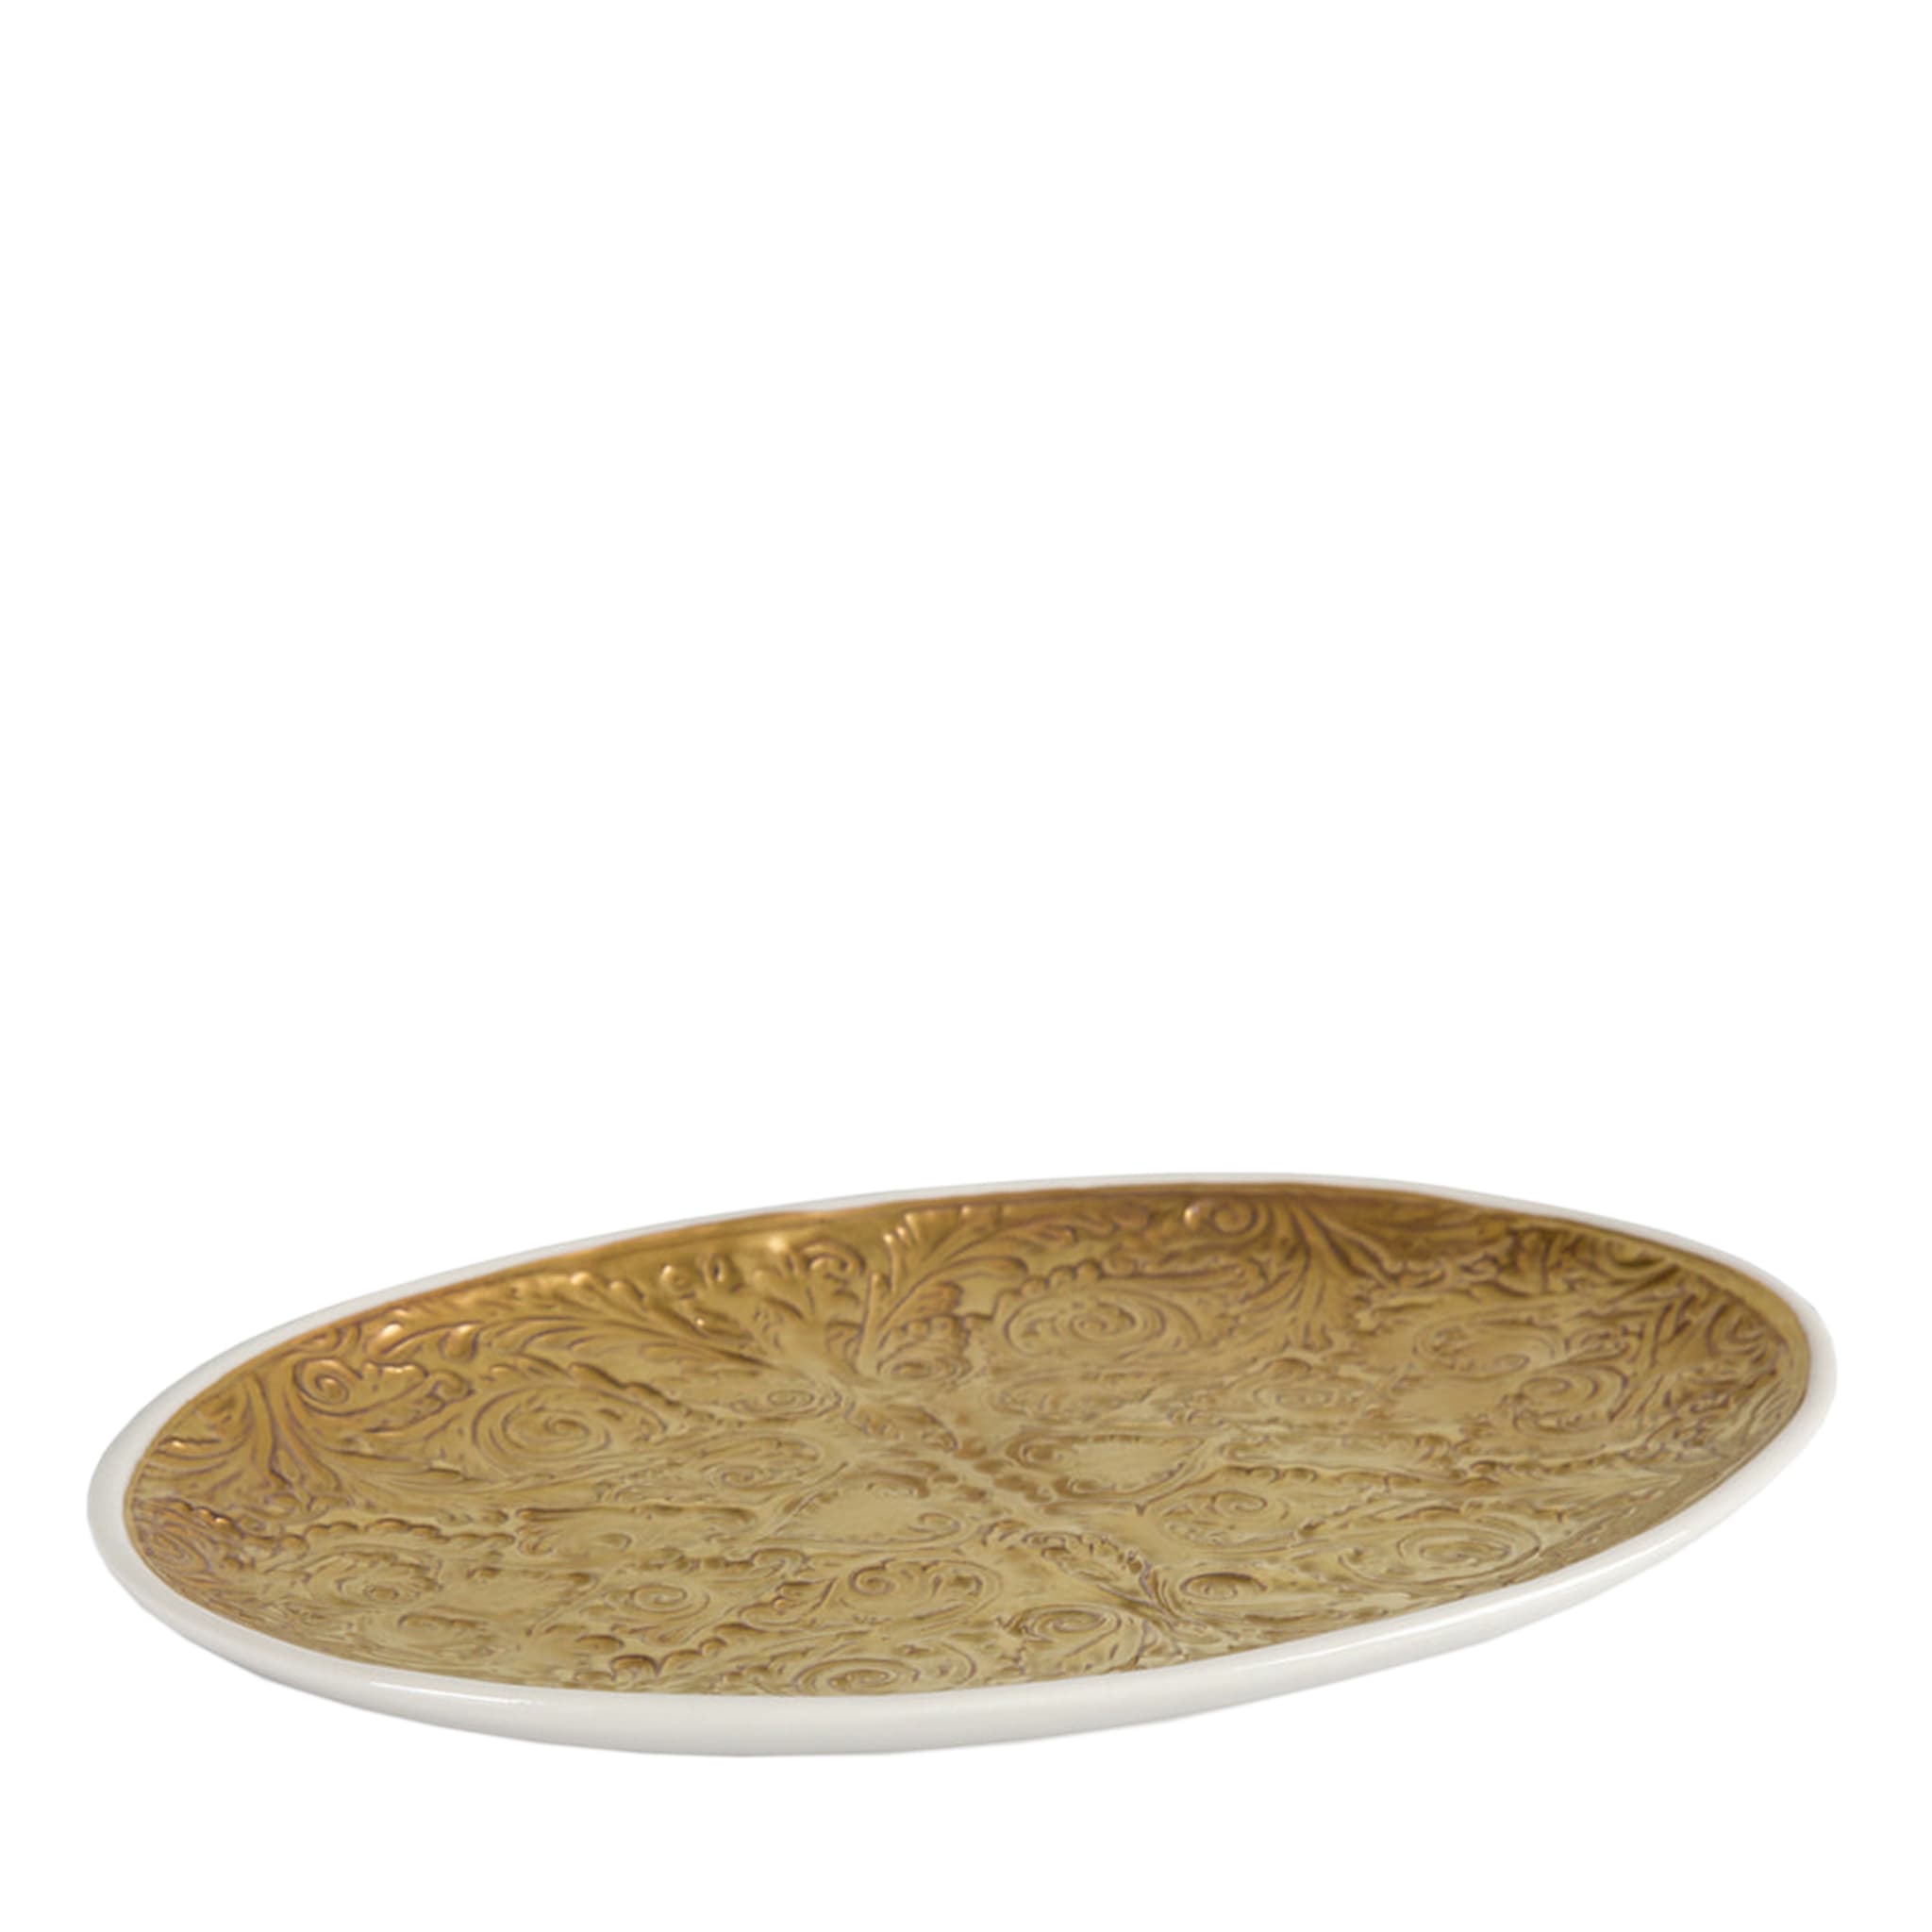 AMOUR OVAL PLATE - GOLD #2 - Main view